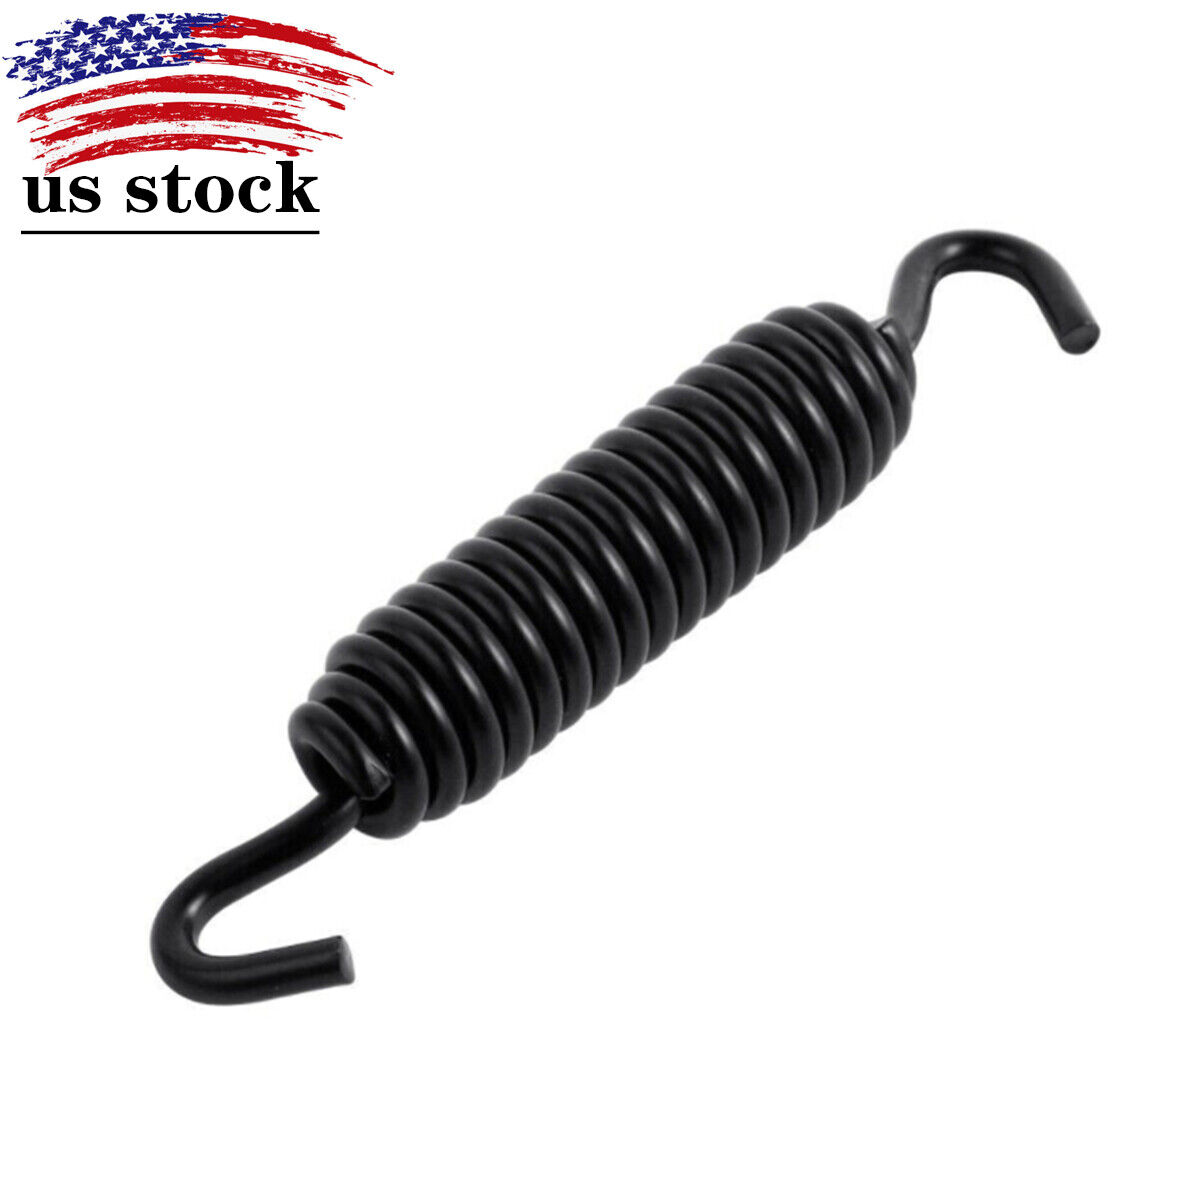 Motorcycle Kickstand Spring Black For Harley Sportster 883 1200 Softail Touring